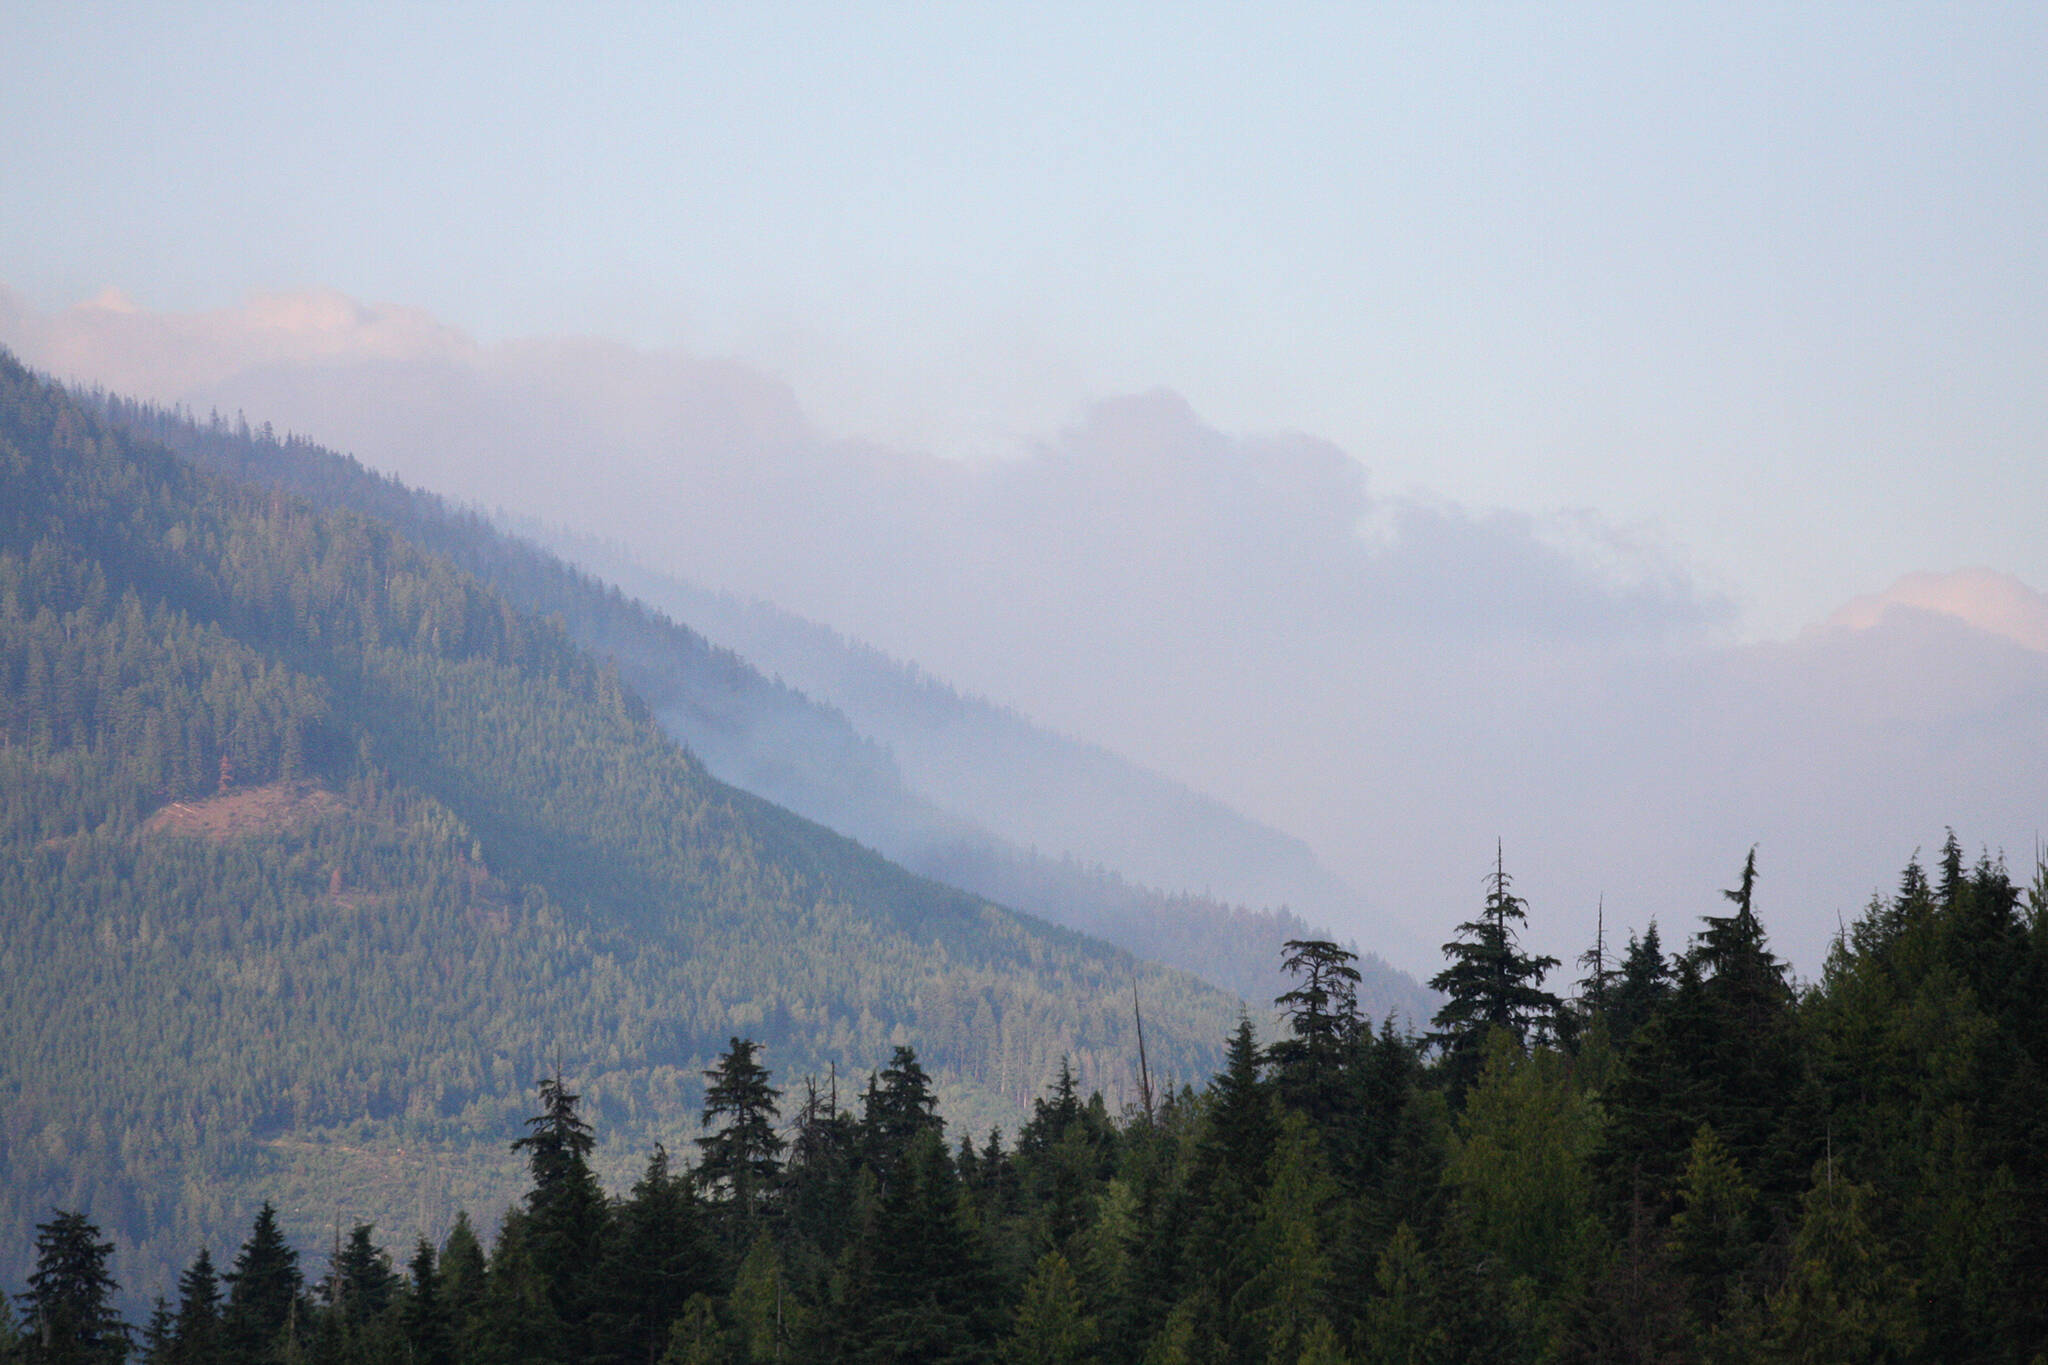 The 200 hectare Mabel Creek wildfire continues to burn approximately 6 kilometres from Mabel Lake on the Lumby side. While an evacuation alert has been issued for approximately 50 cabins and the Cottonwood Beach recreation site, no structures are currently threatened. (Jennifer Smith/Morning Star)